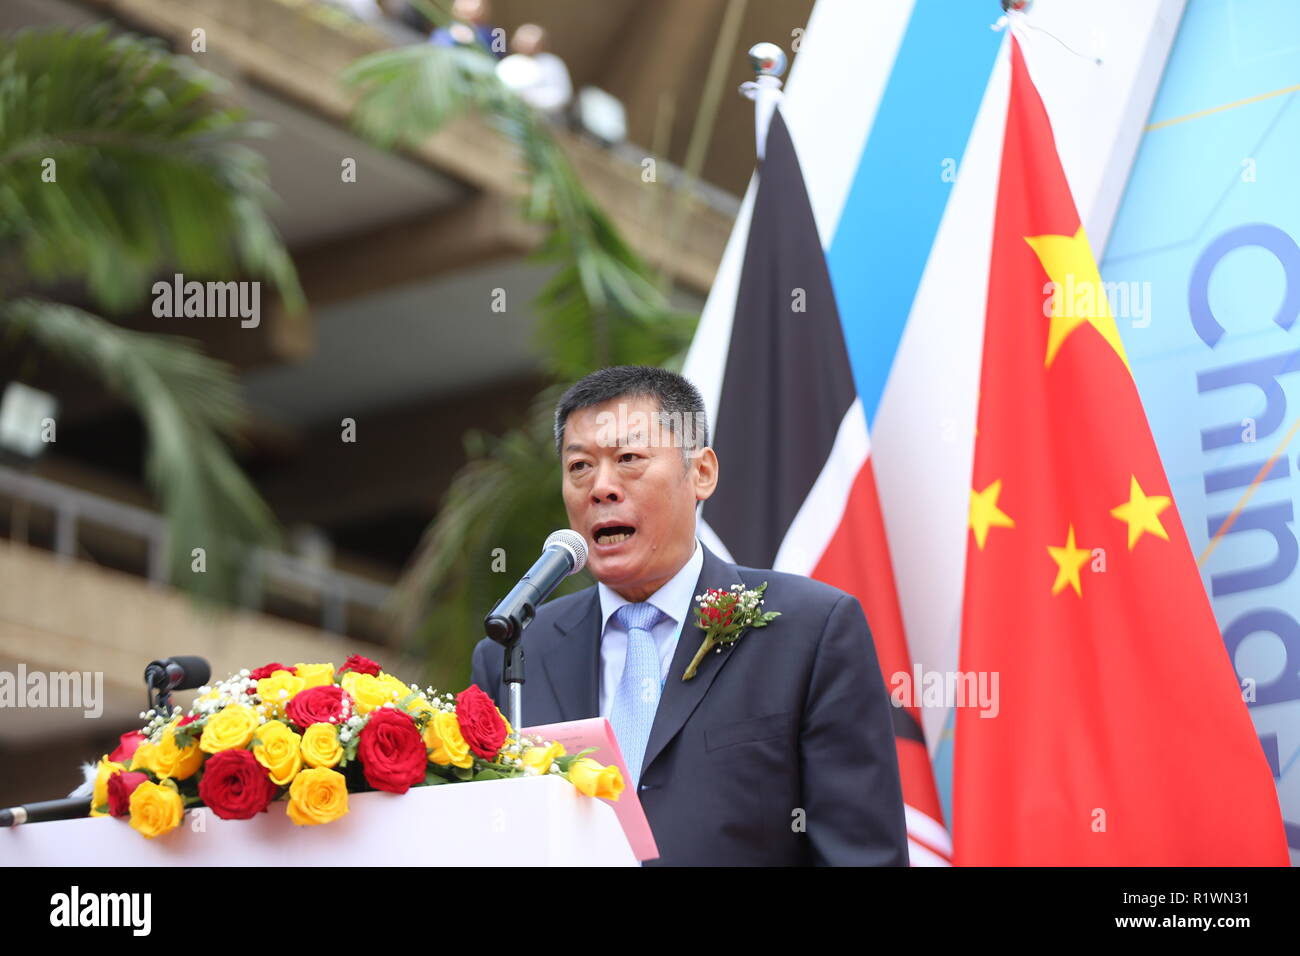 The Chinese Head of Exhibition Delegation Wang Xiaoguang seen speaking during the event. China and Kenya held an Industrial Capacity Cooperation Exposition in Nairobi, Kenya. It involved signing of bilateral cooperations in areas of infrastructure where production and process companies have set up base in African continent including Kenya. Stock Photo